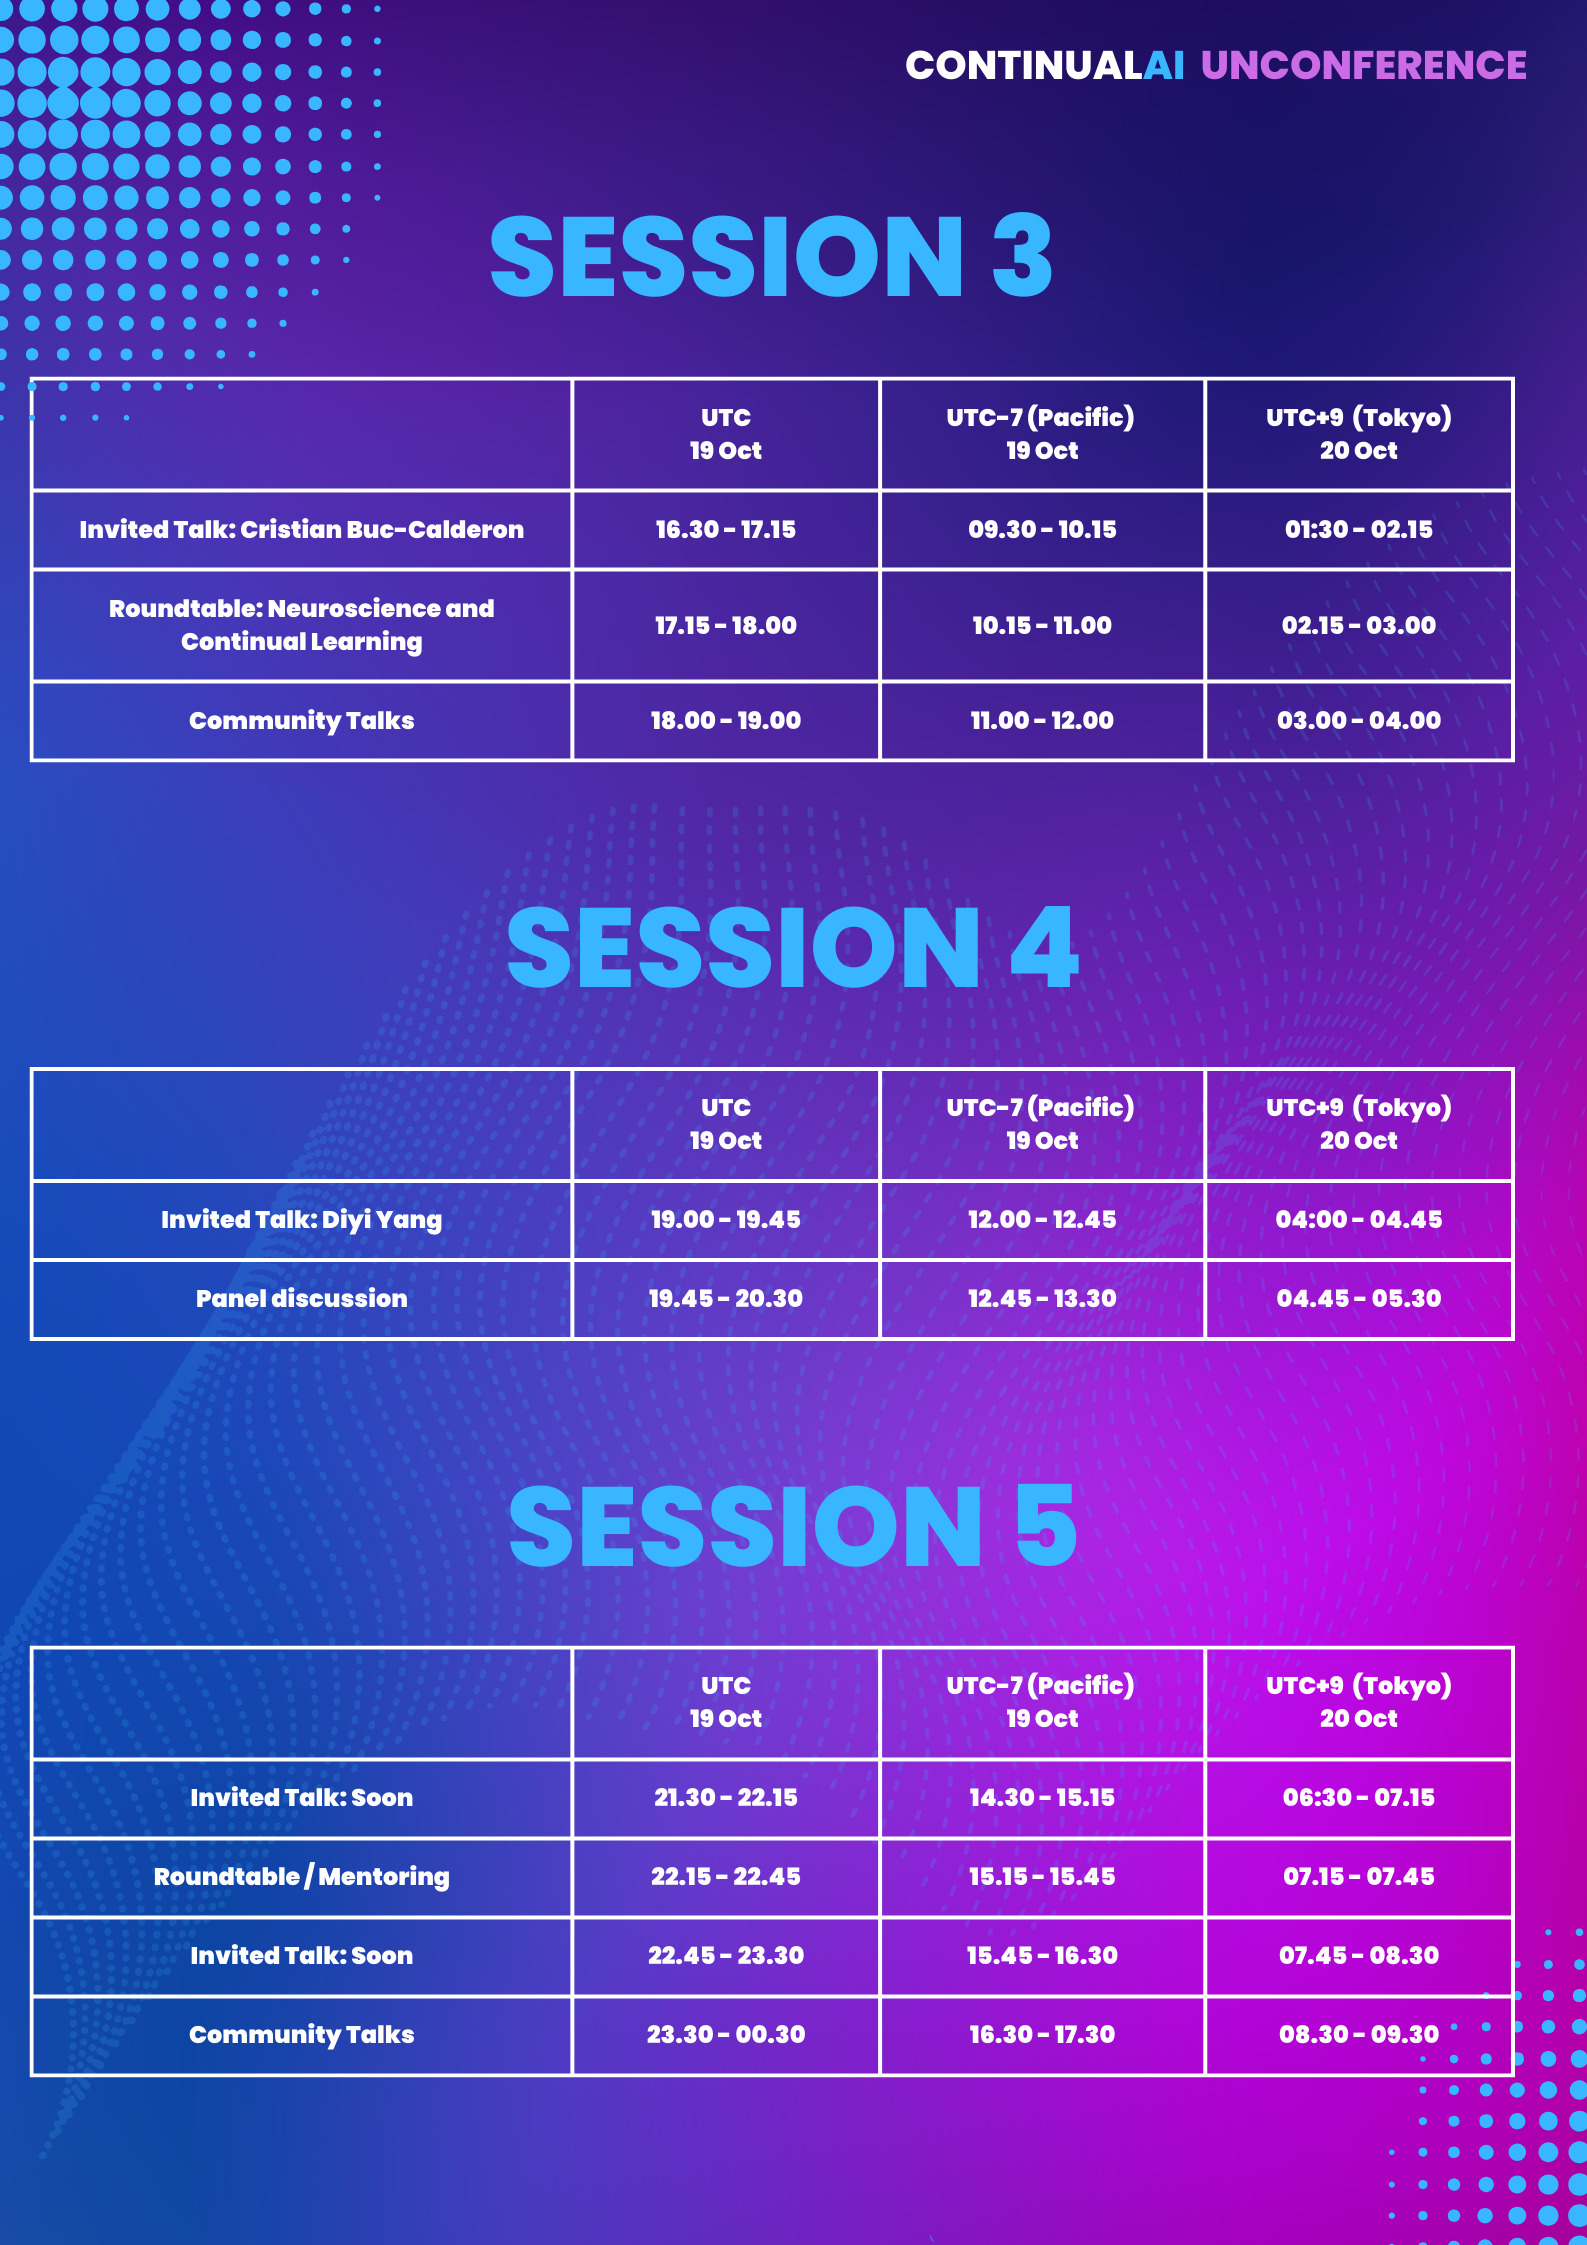 Schedule of Session 3, Session 4, Session 5